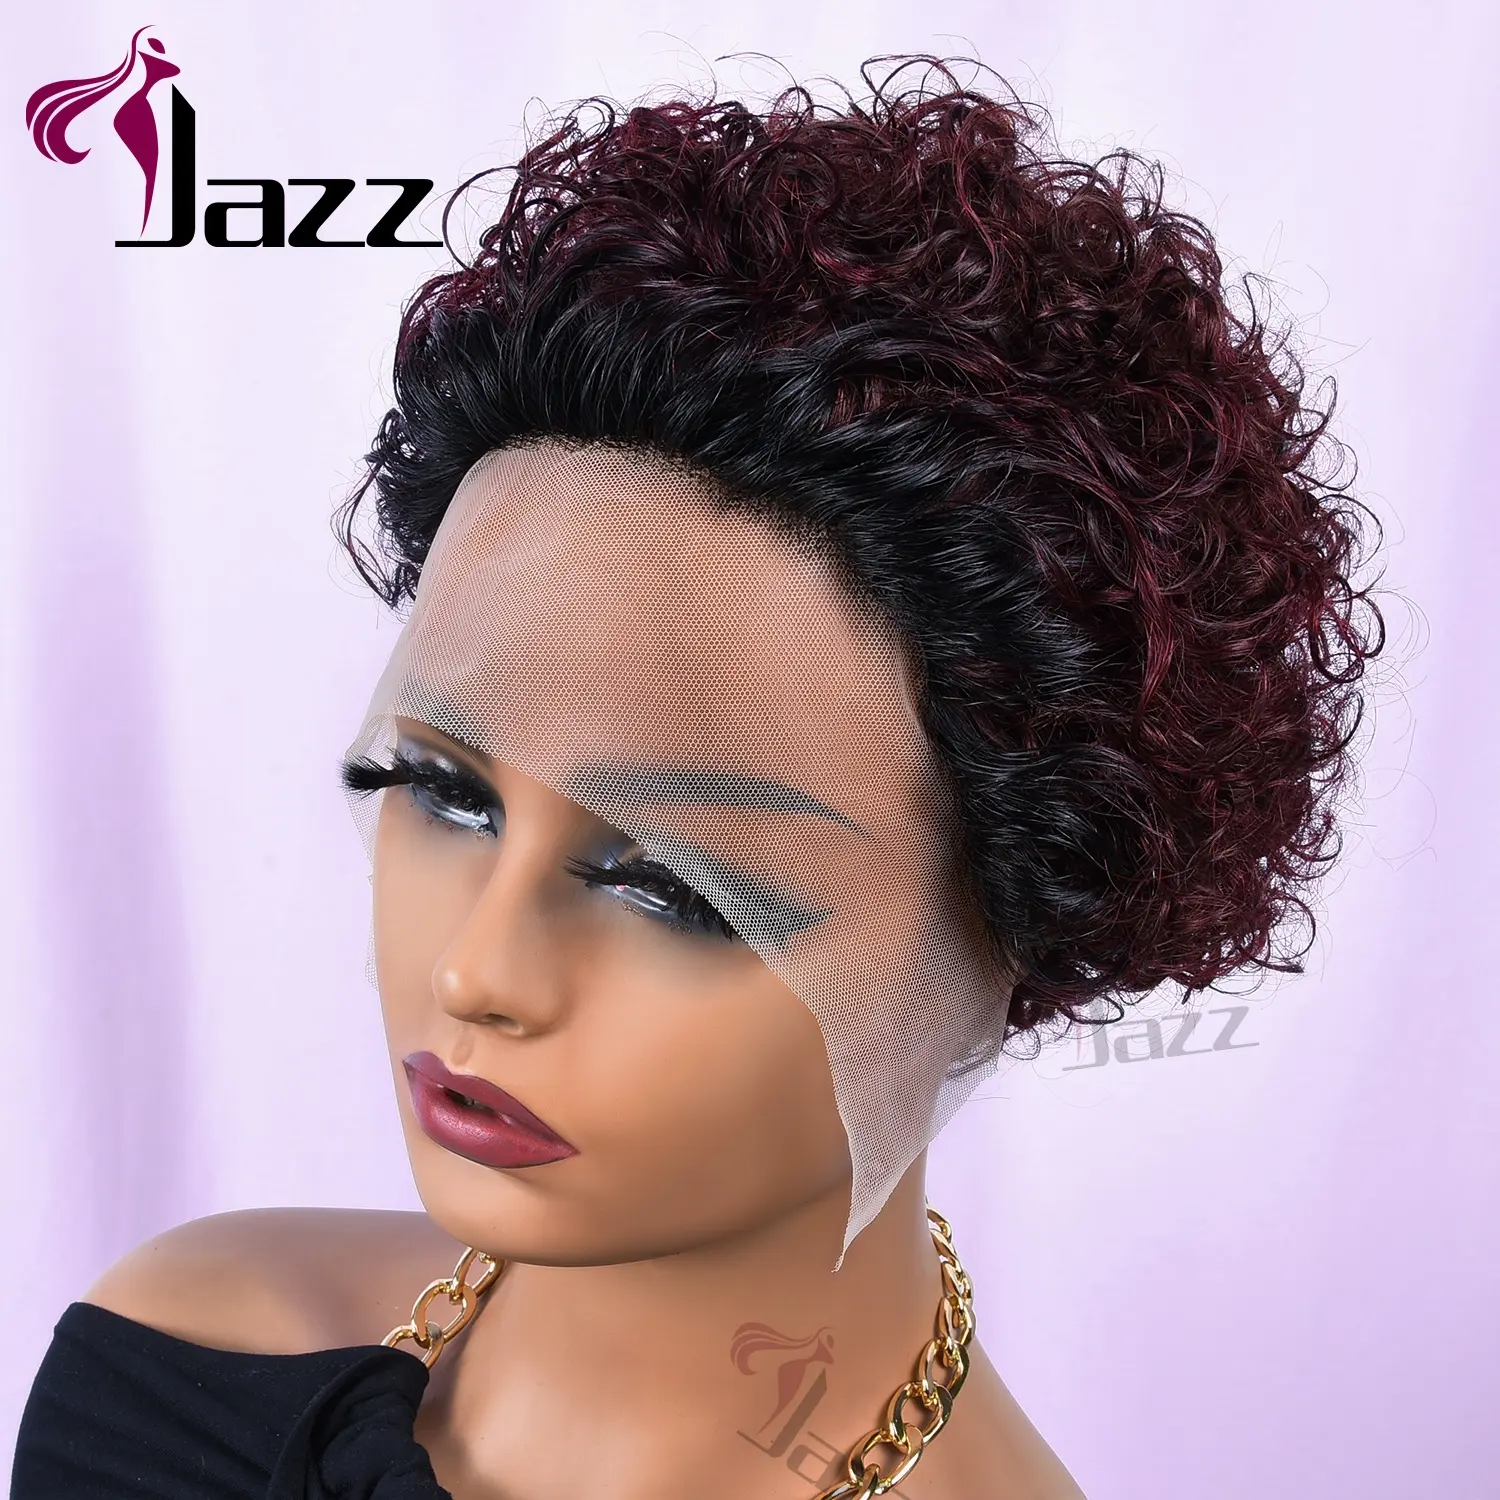 Raw Afro Wave Virgin Human Hair 99j Color Short Curls Wig Perruque Pixie Cut Human Hair gs HD Lace Front Wigs For Black Women